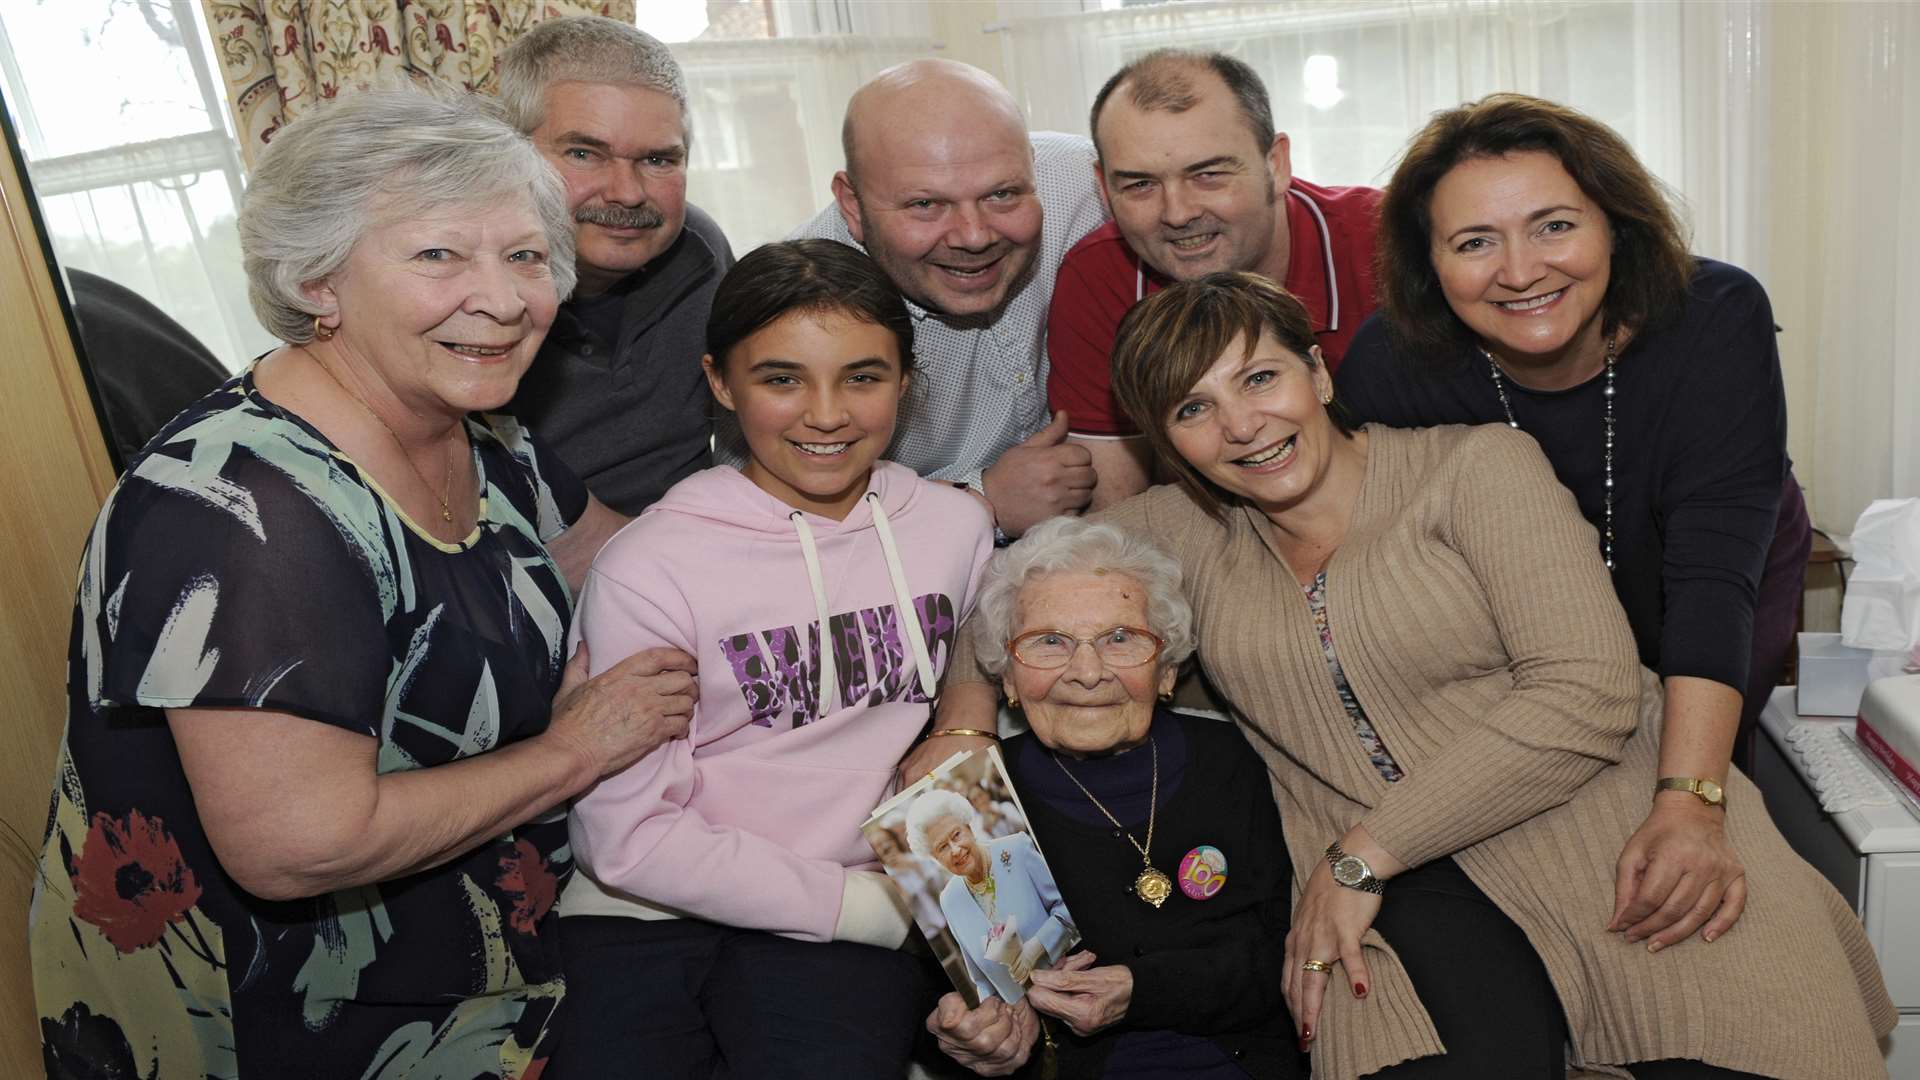 Doris Johnson with members of her family on her 100th birthday.